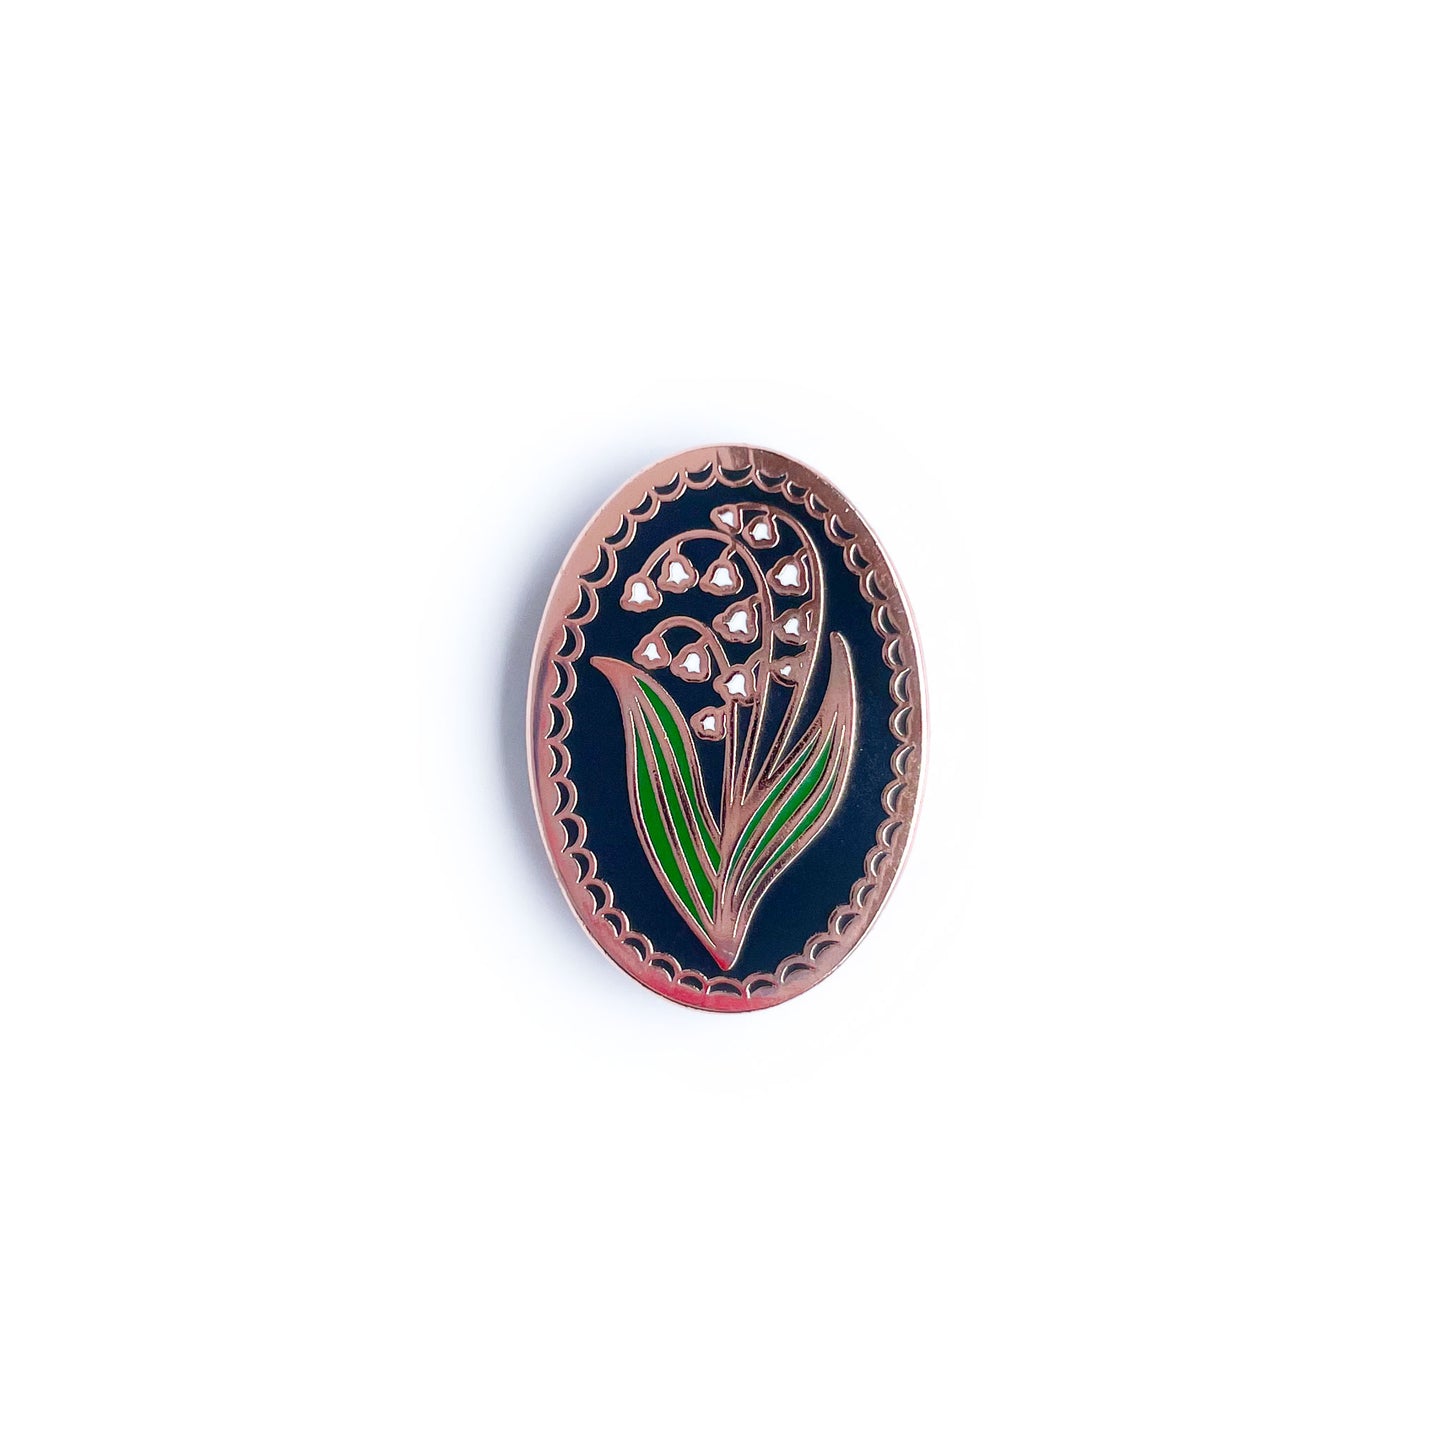 An enamel pin shaped like an oval with a lily of the valley in it. 